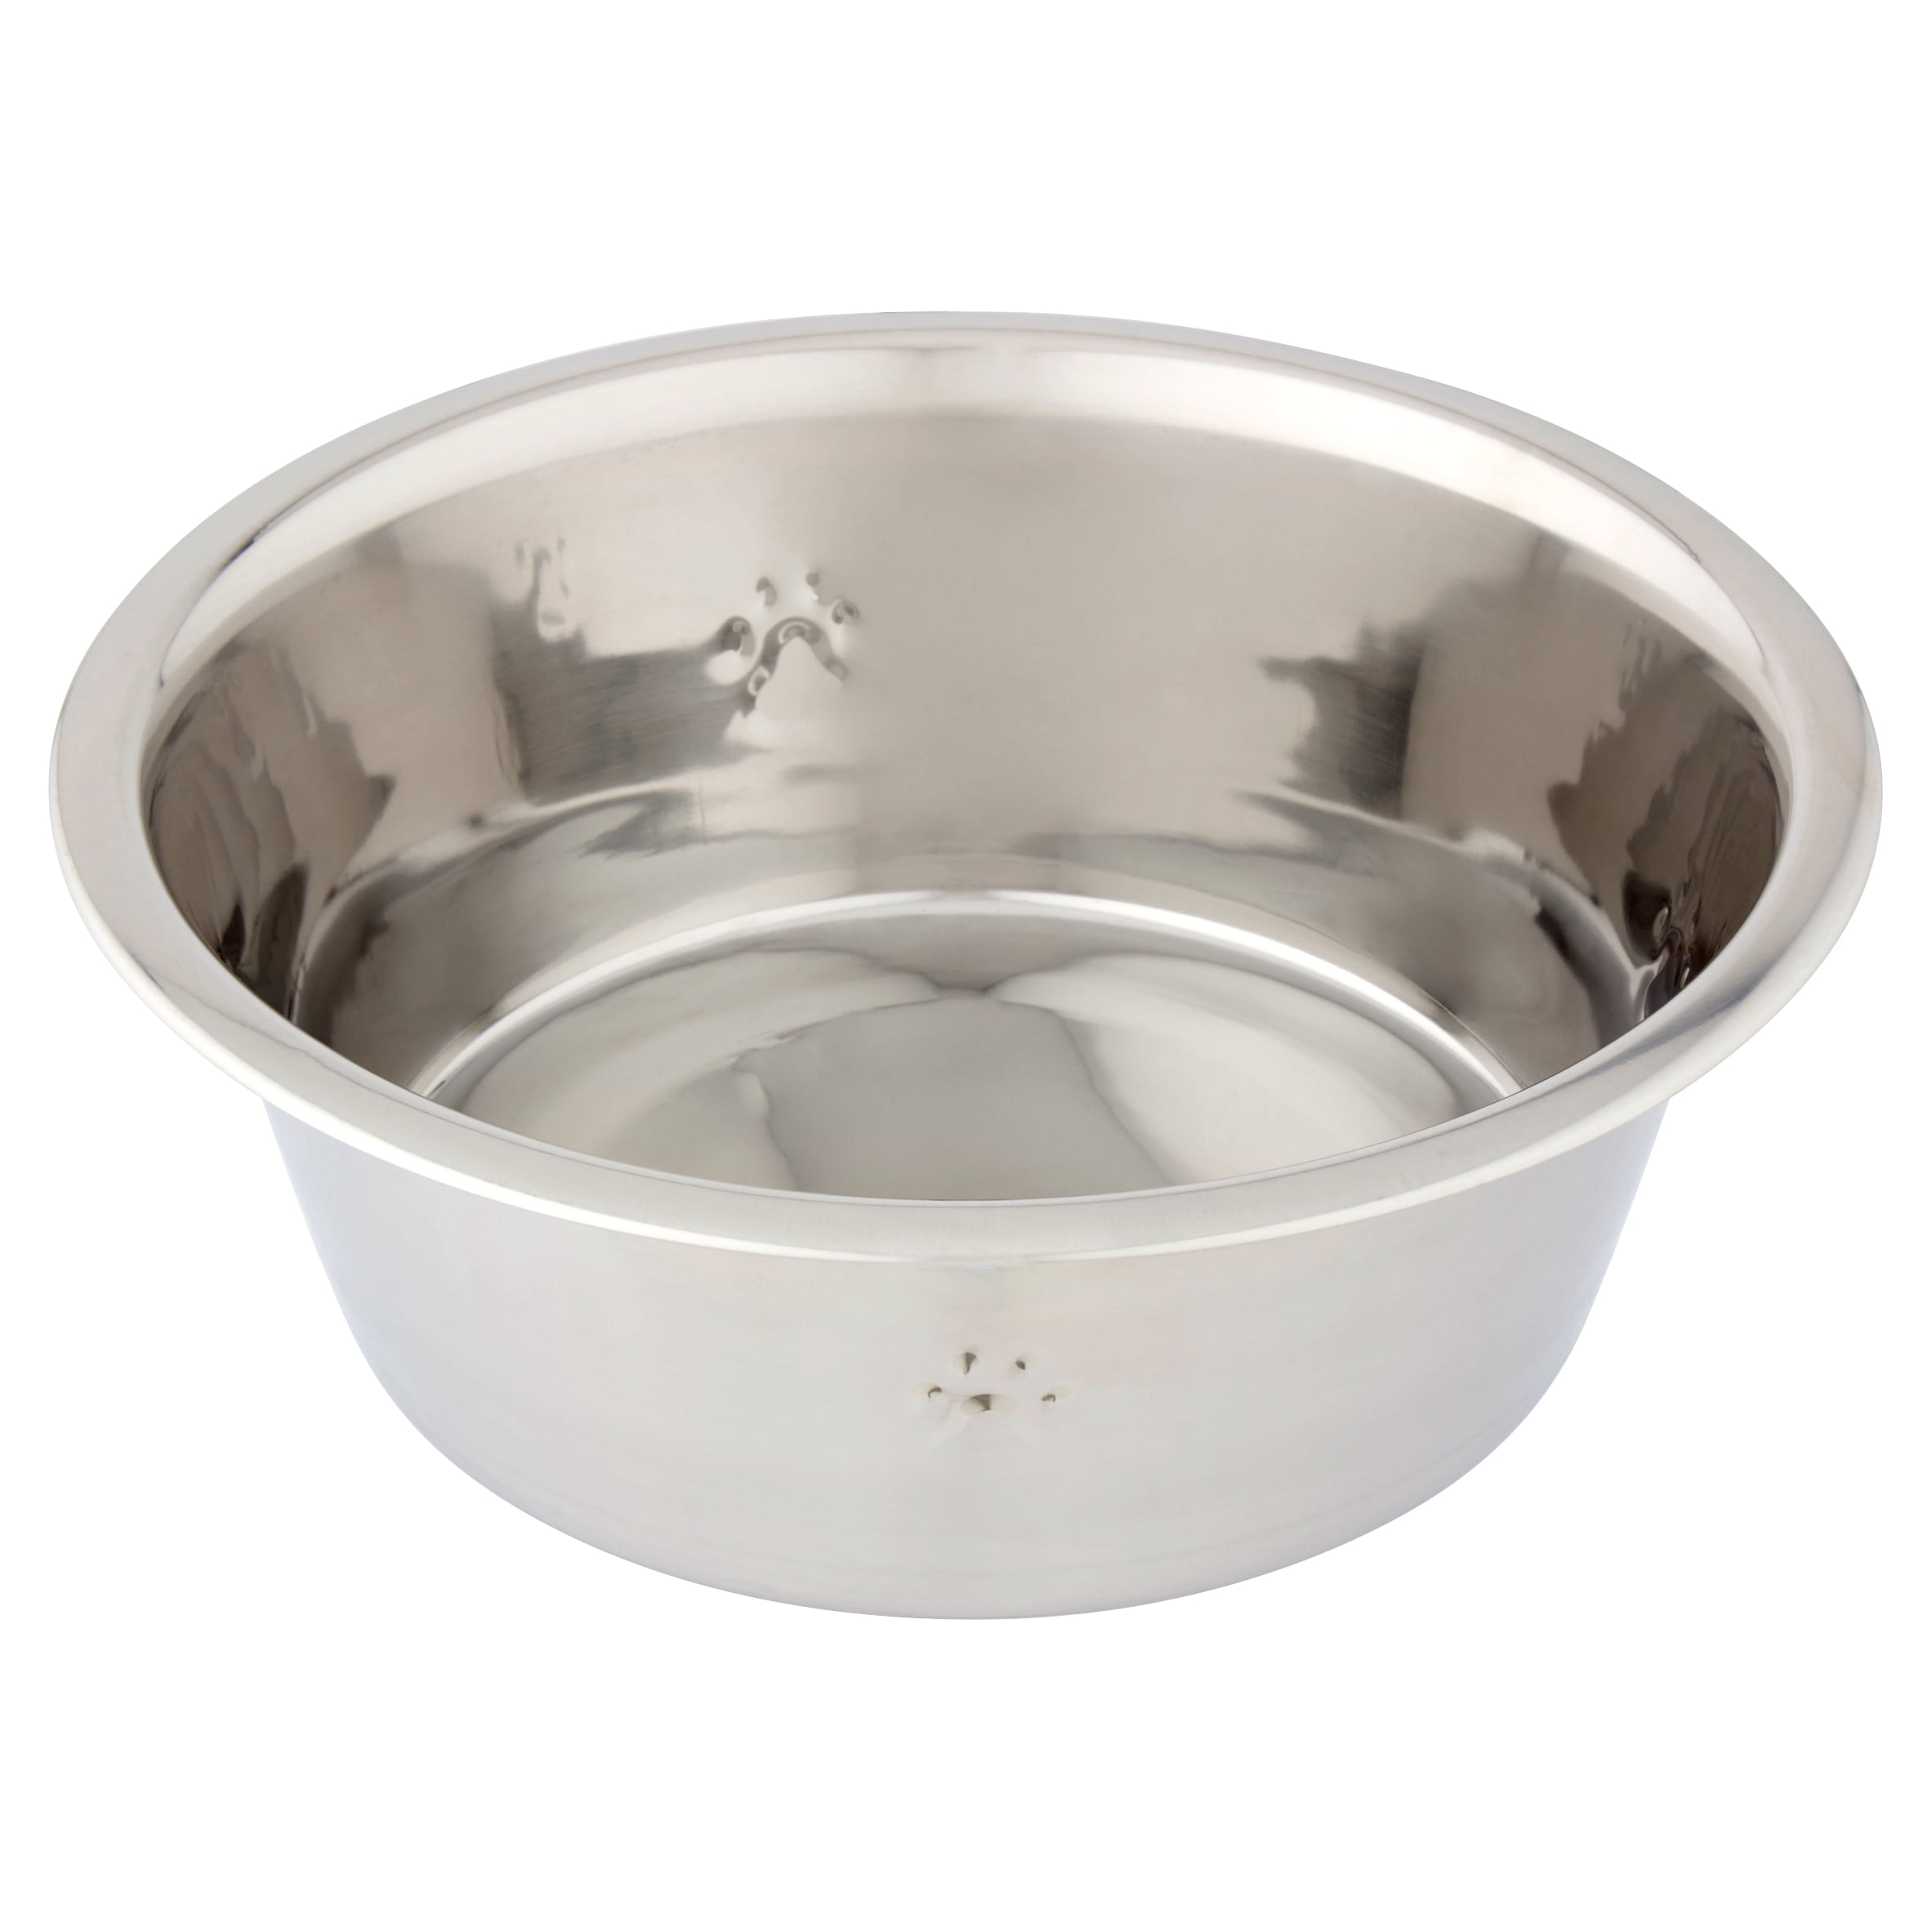 Vibrant Life Stainless Steel Dog Bowl with Paws, Large - Walmart.com Large Stainless Steel Dog Water Bowl